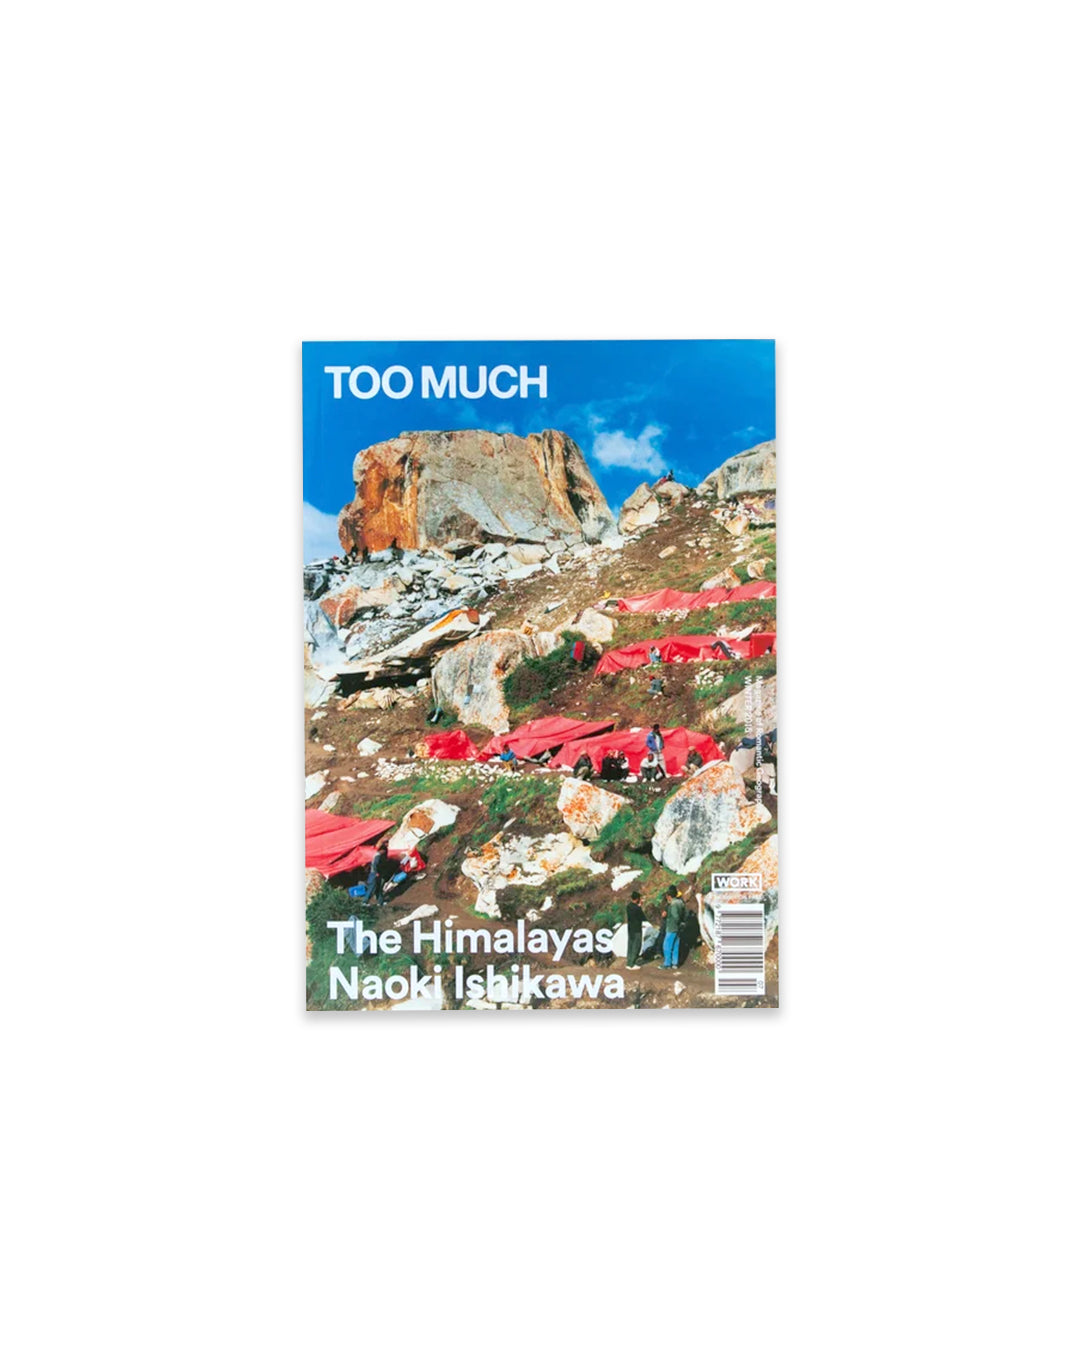 Too Much - Issue 7 - Himalayas